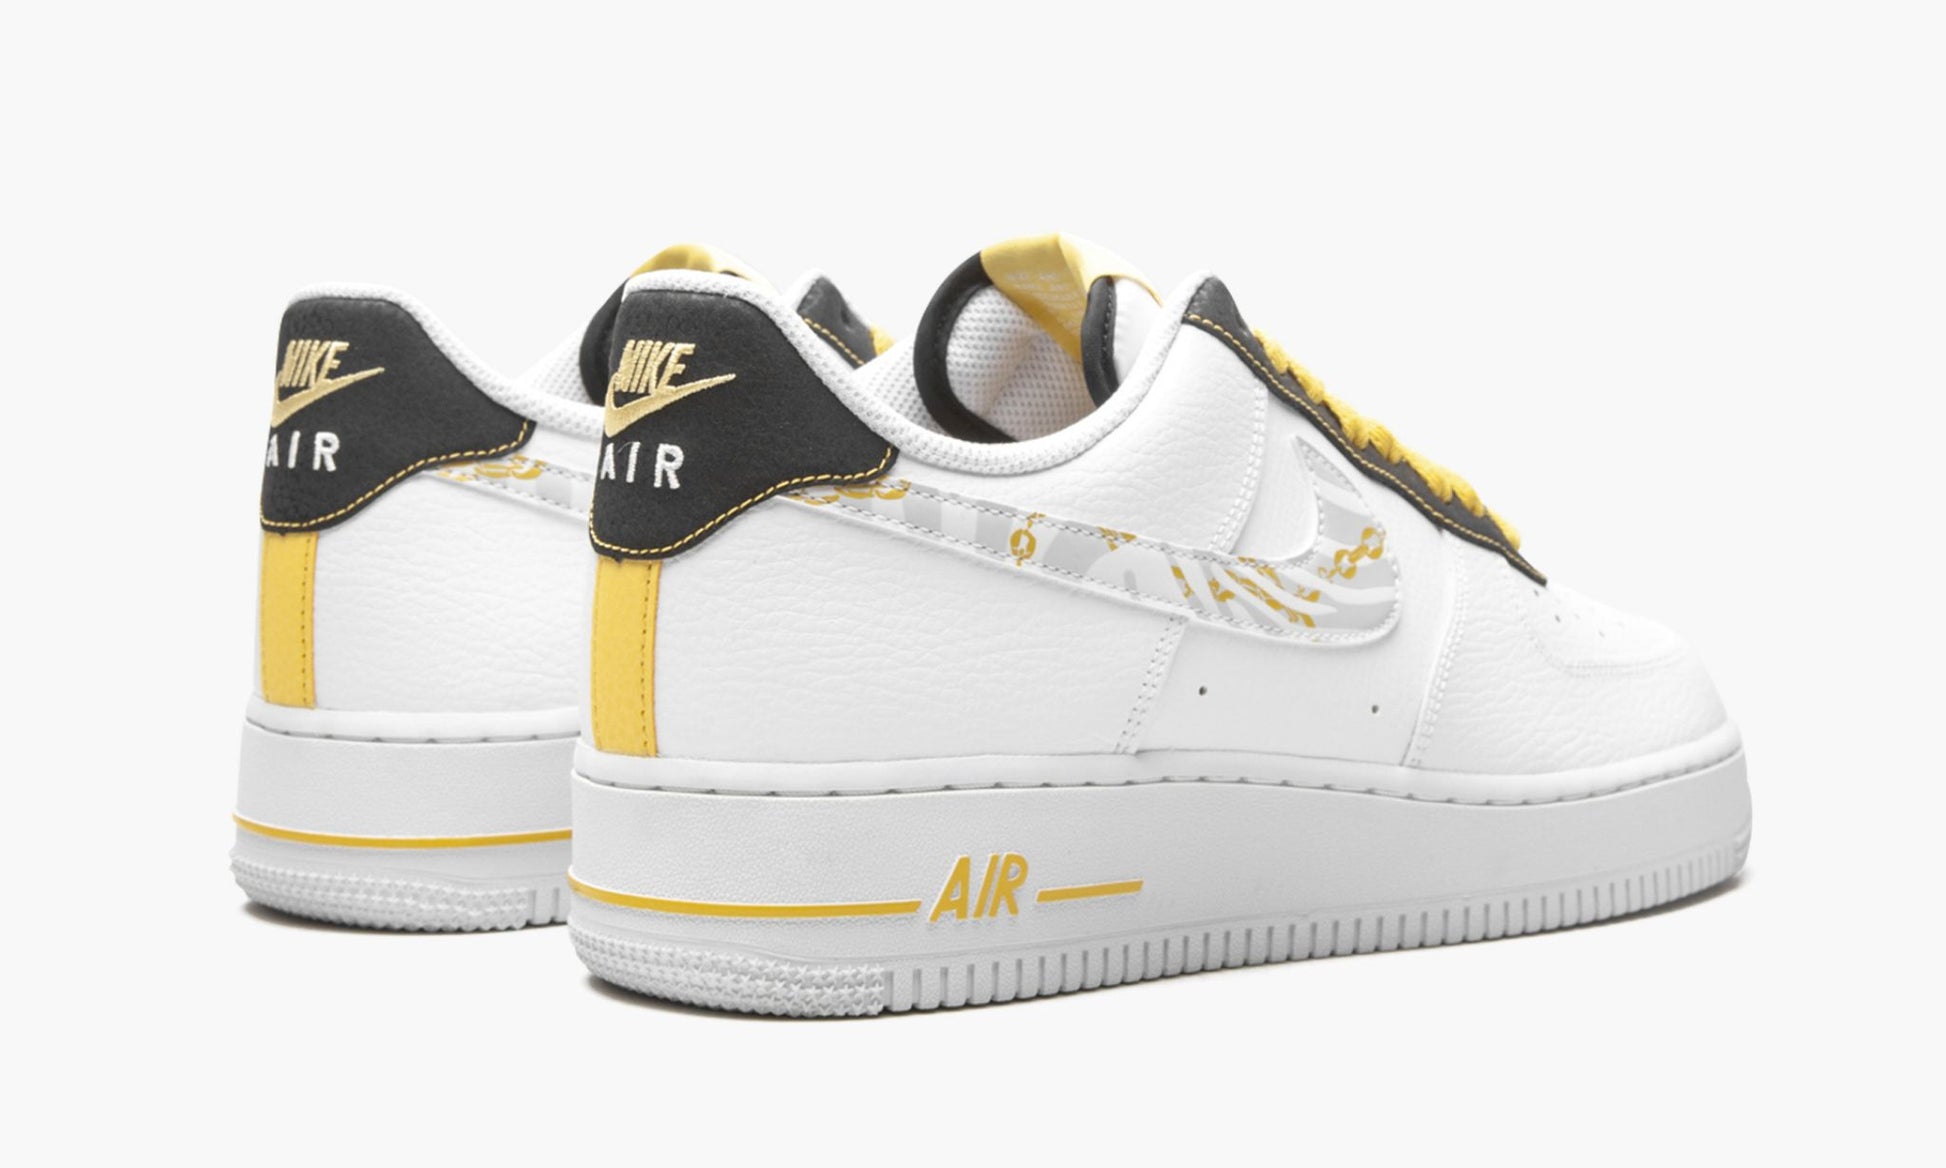 Air Force 1 Low "Gold Link Zebra"